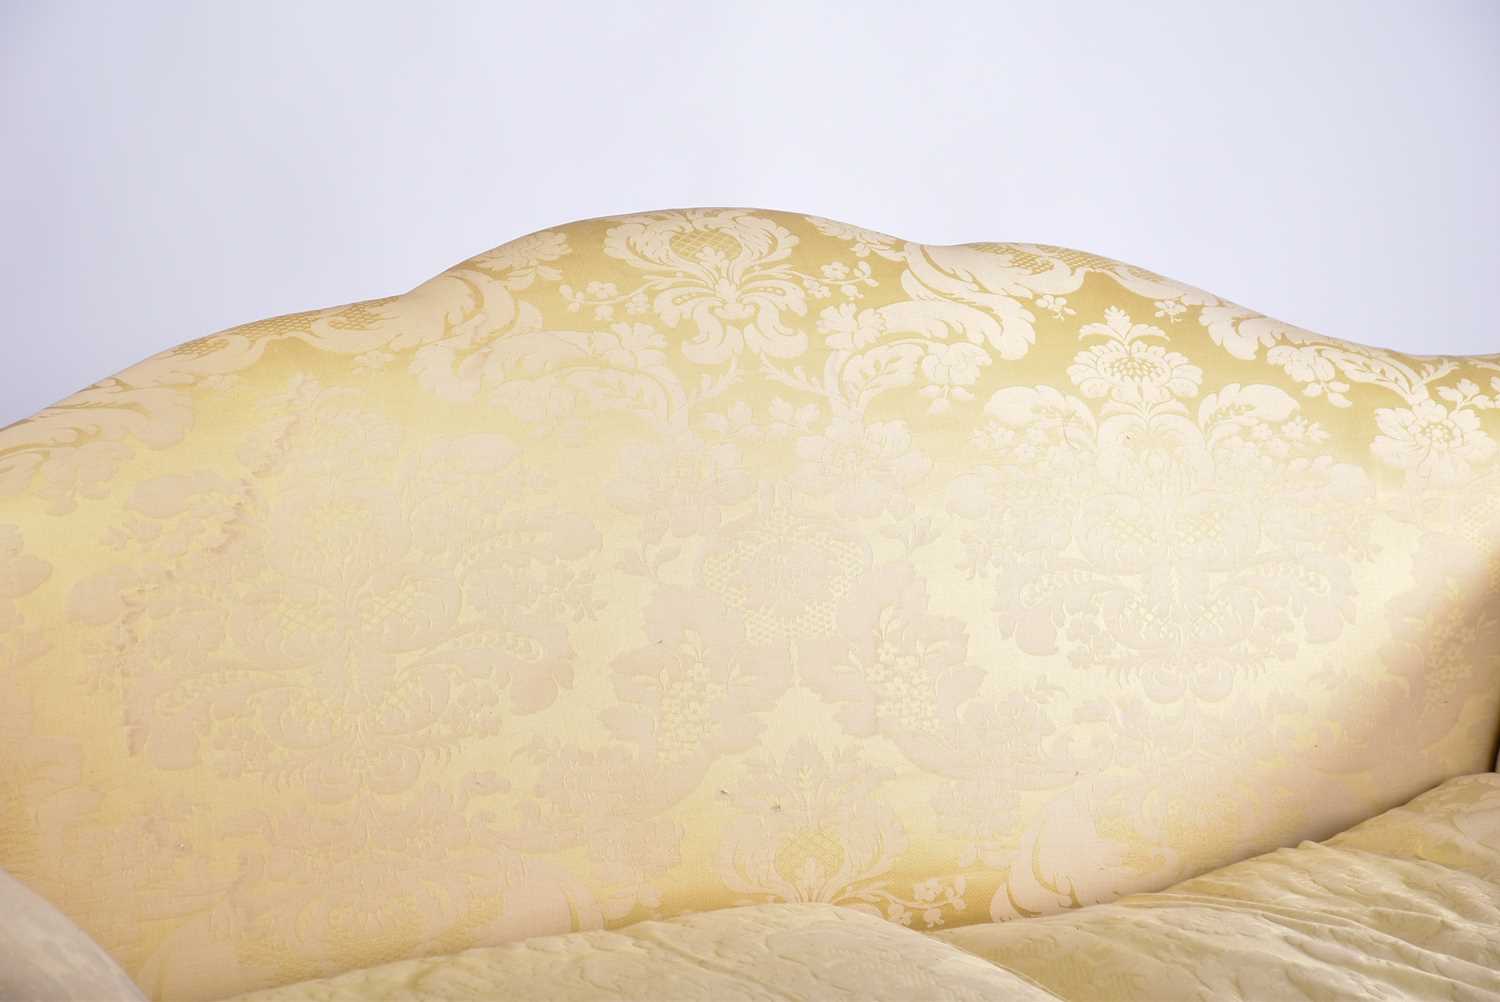 A pair of Harrods camel back two-seat sofas with stuff over pale gold Damask upholstery with - Image 12 of 12